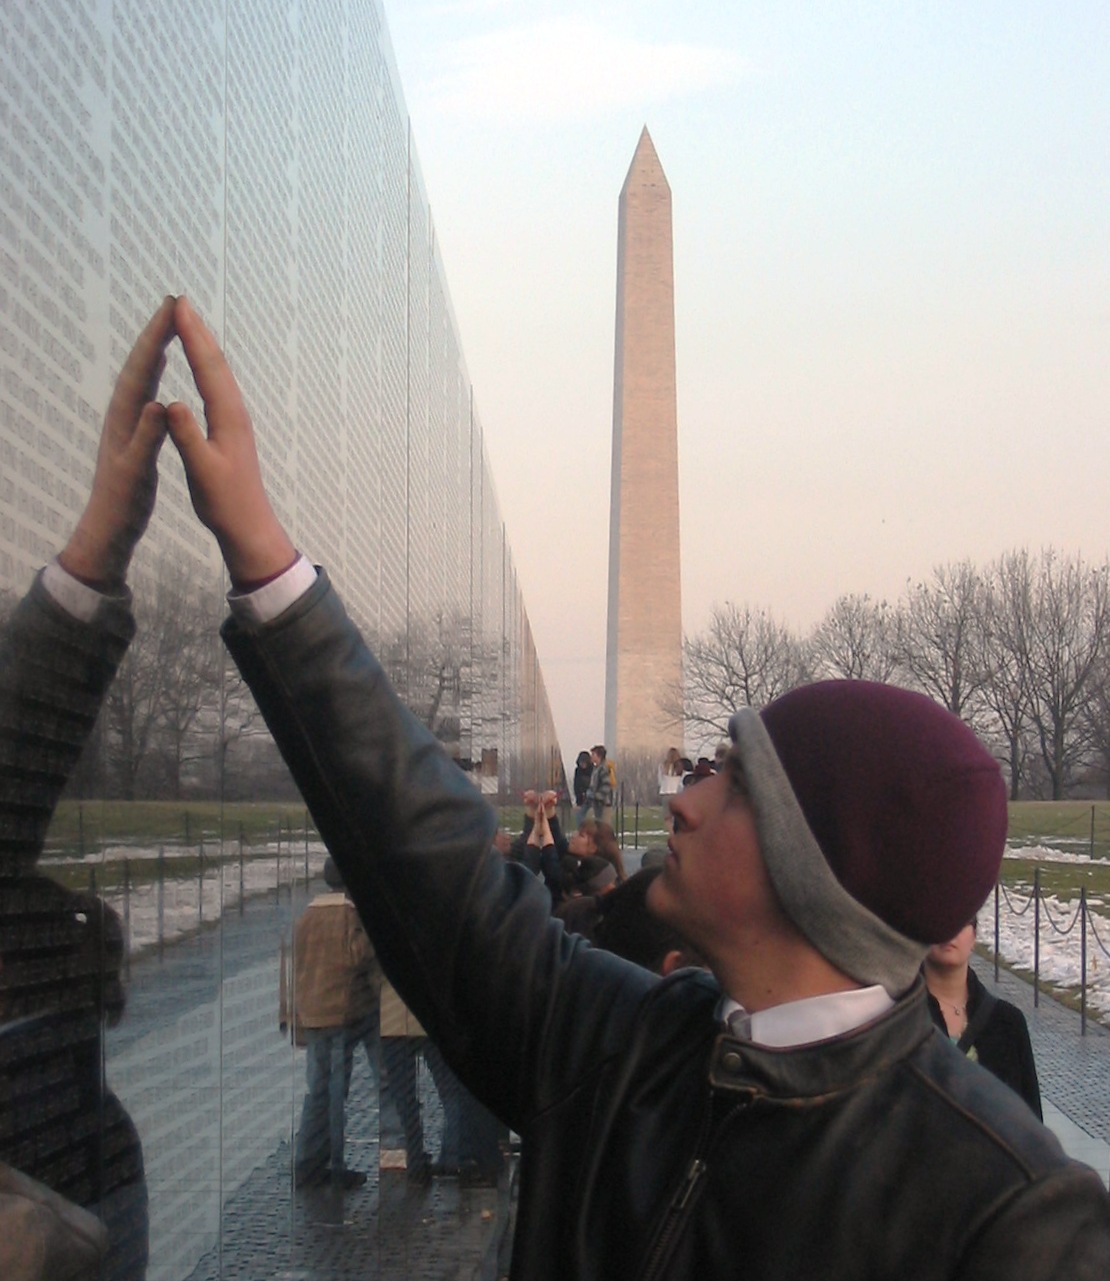 A visitor touching a name on The Wall at the Vietnam Veterans' Memorial. Photographed on January 26, 2005.